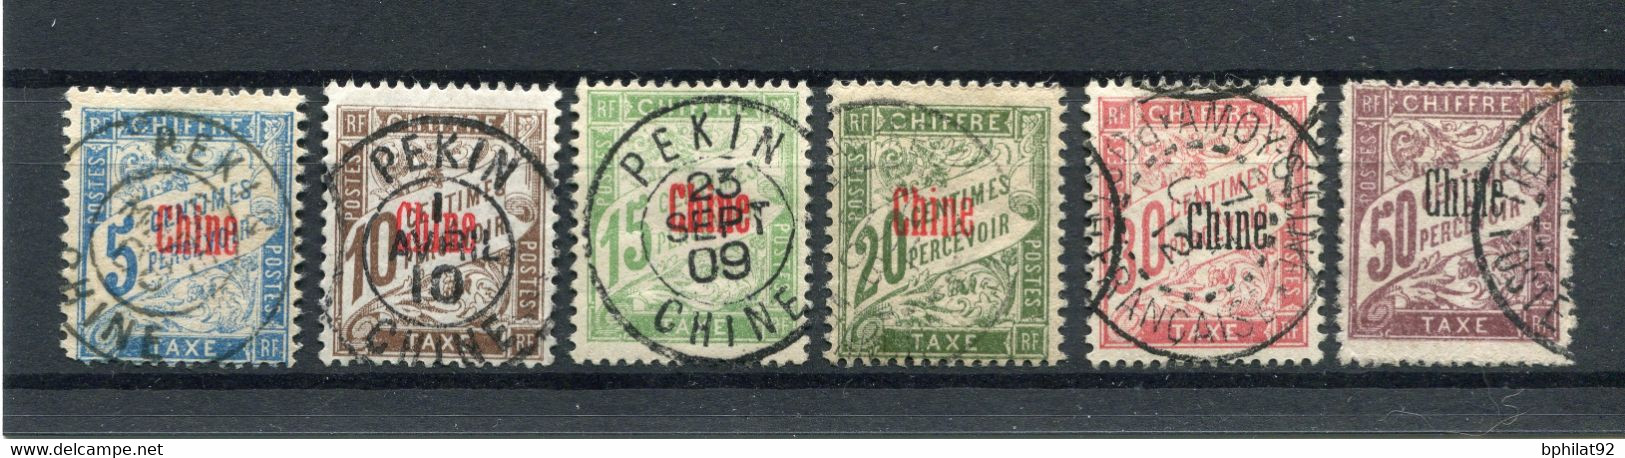 !!! CHINE, SERIE DE TAXES N°1/6 OBLITERATIONS SELECTIONNES - Postage Due